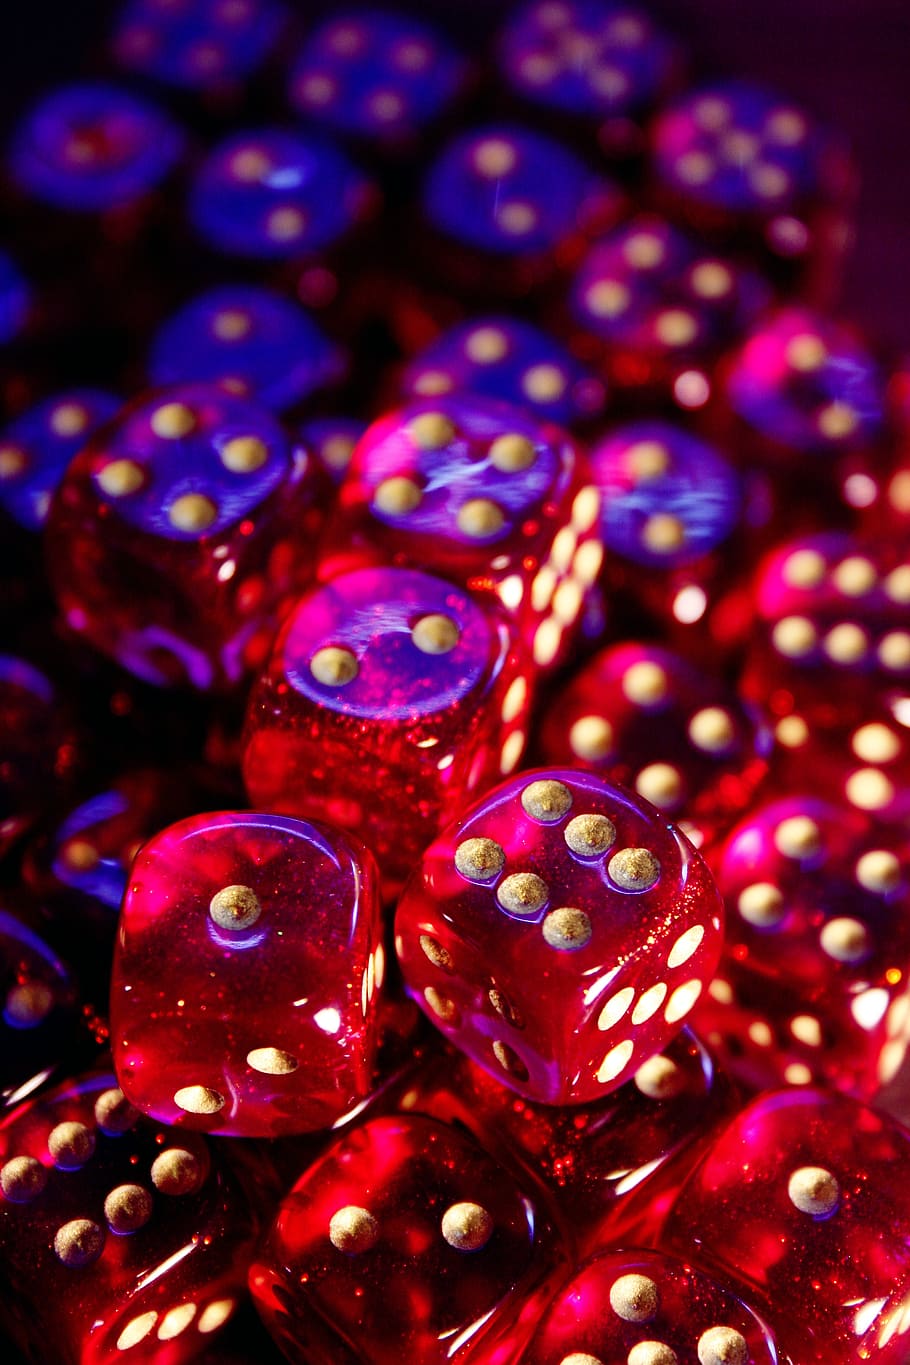 red dice lot, cube, role playing game, pay, instantaneous speed, number cube, gambling, luck, red, pink